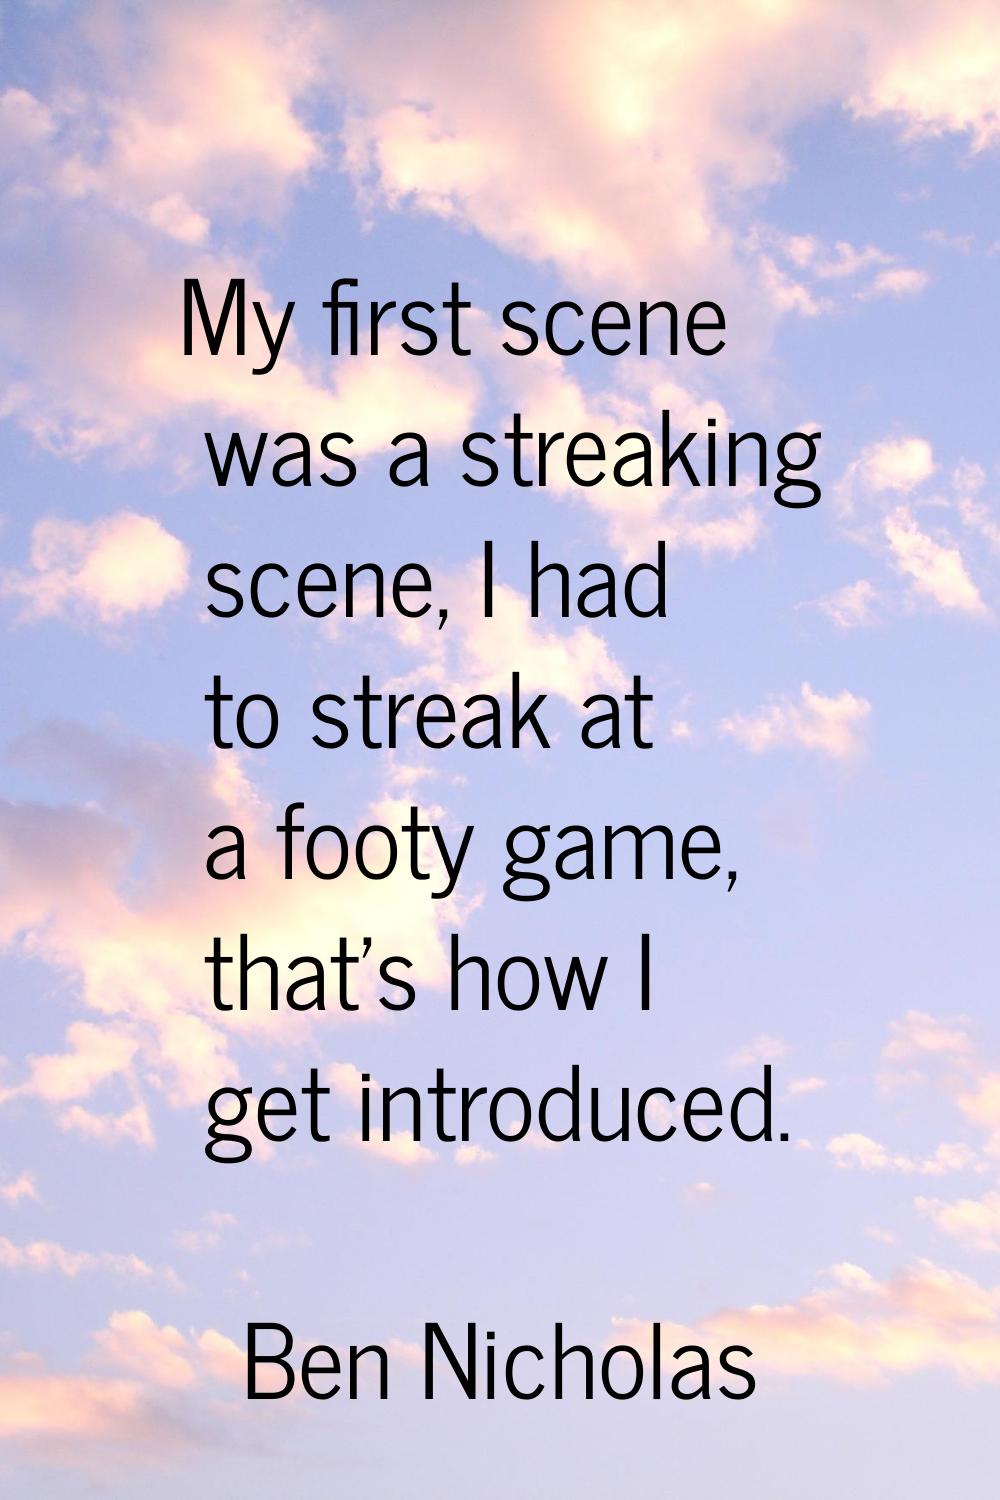 My first scene was a streaking scene, I had to streak at a footy game, that's how I get introduced.